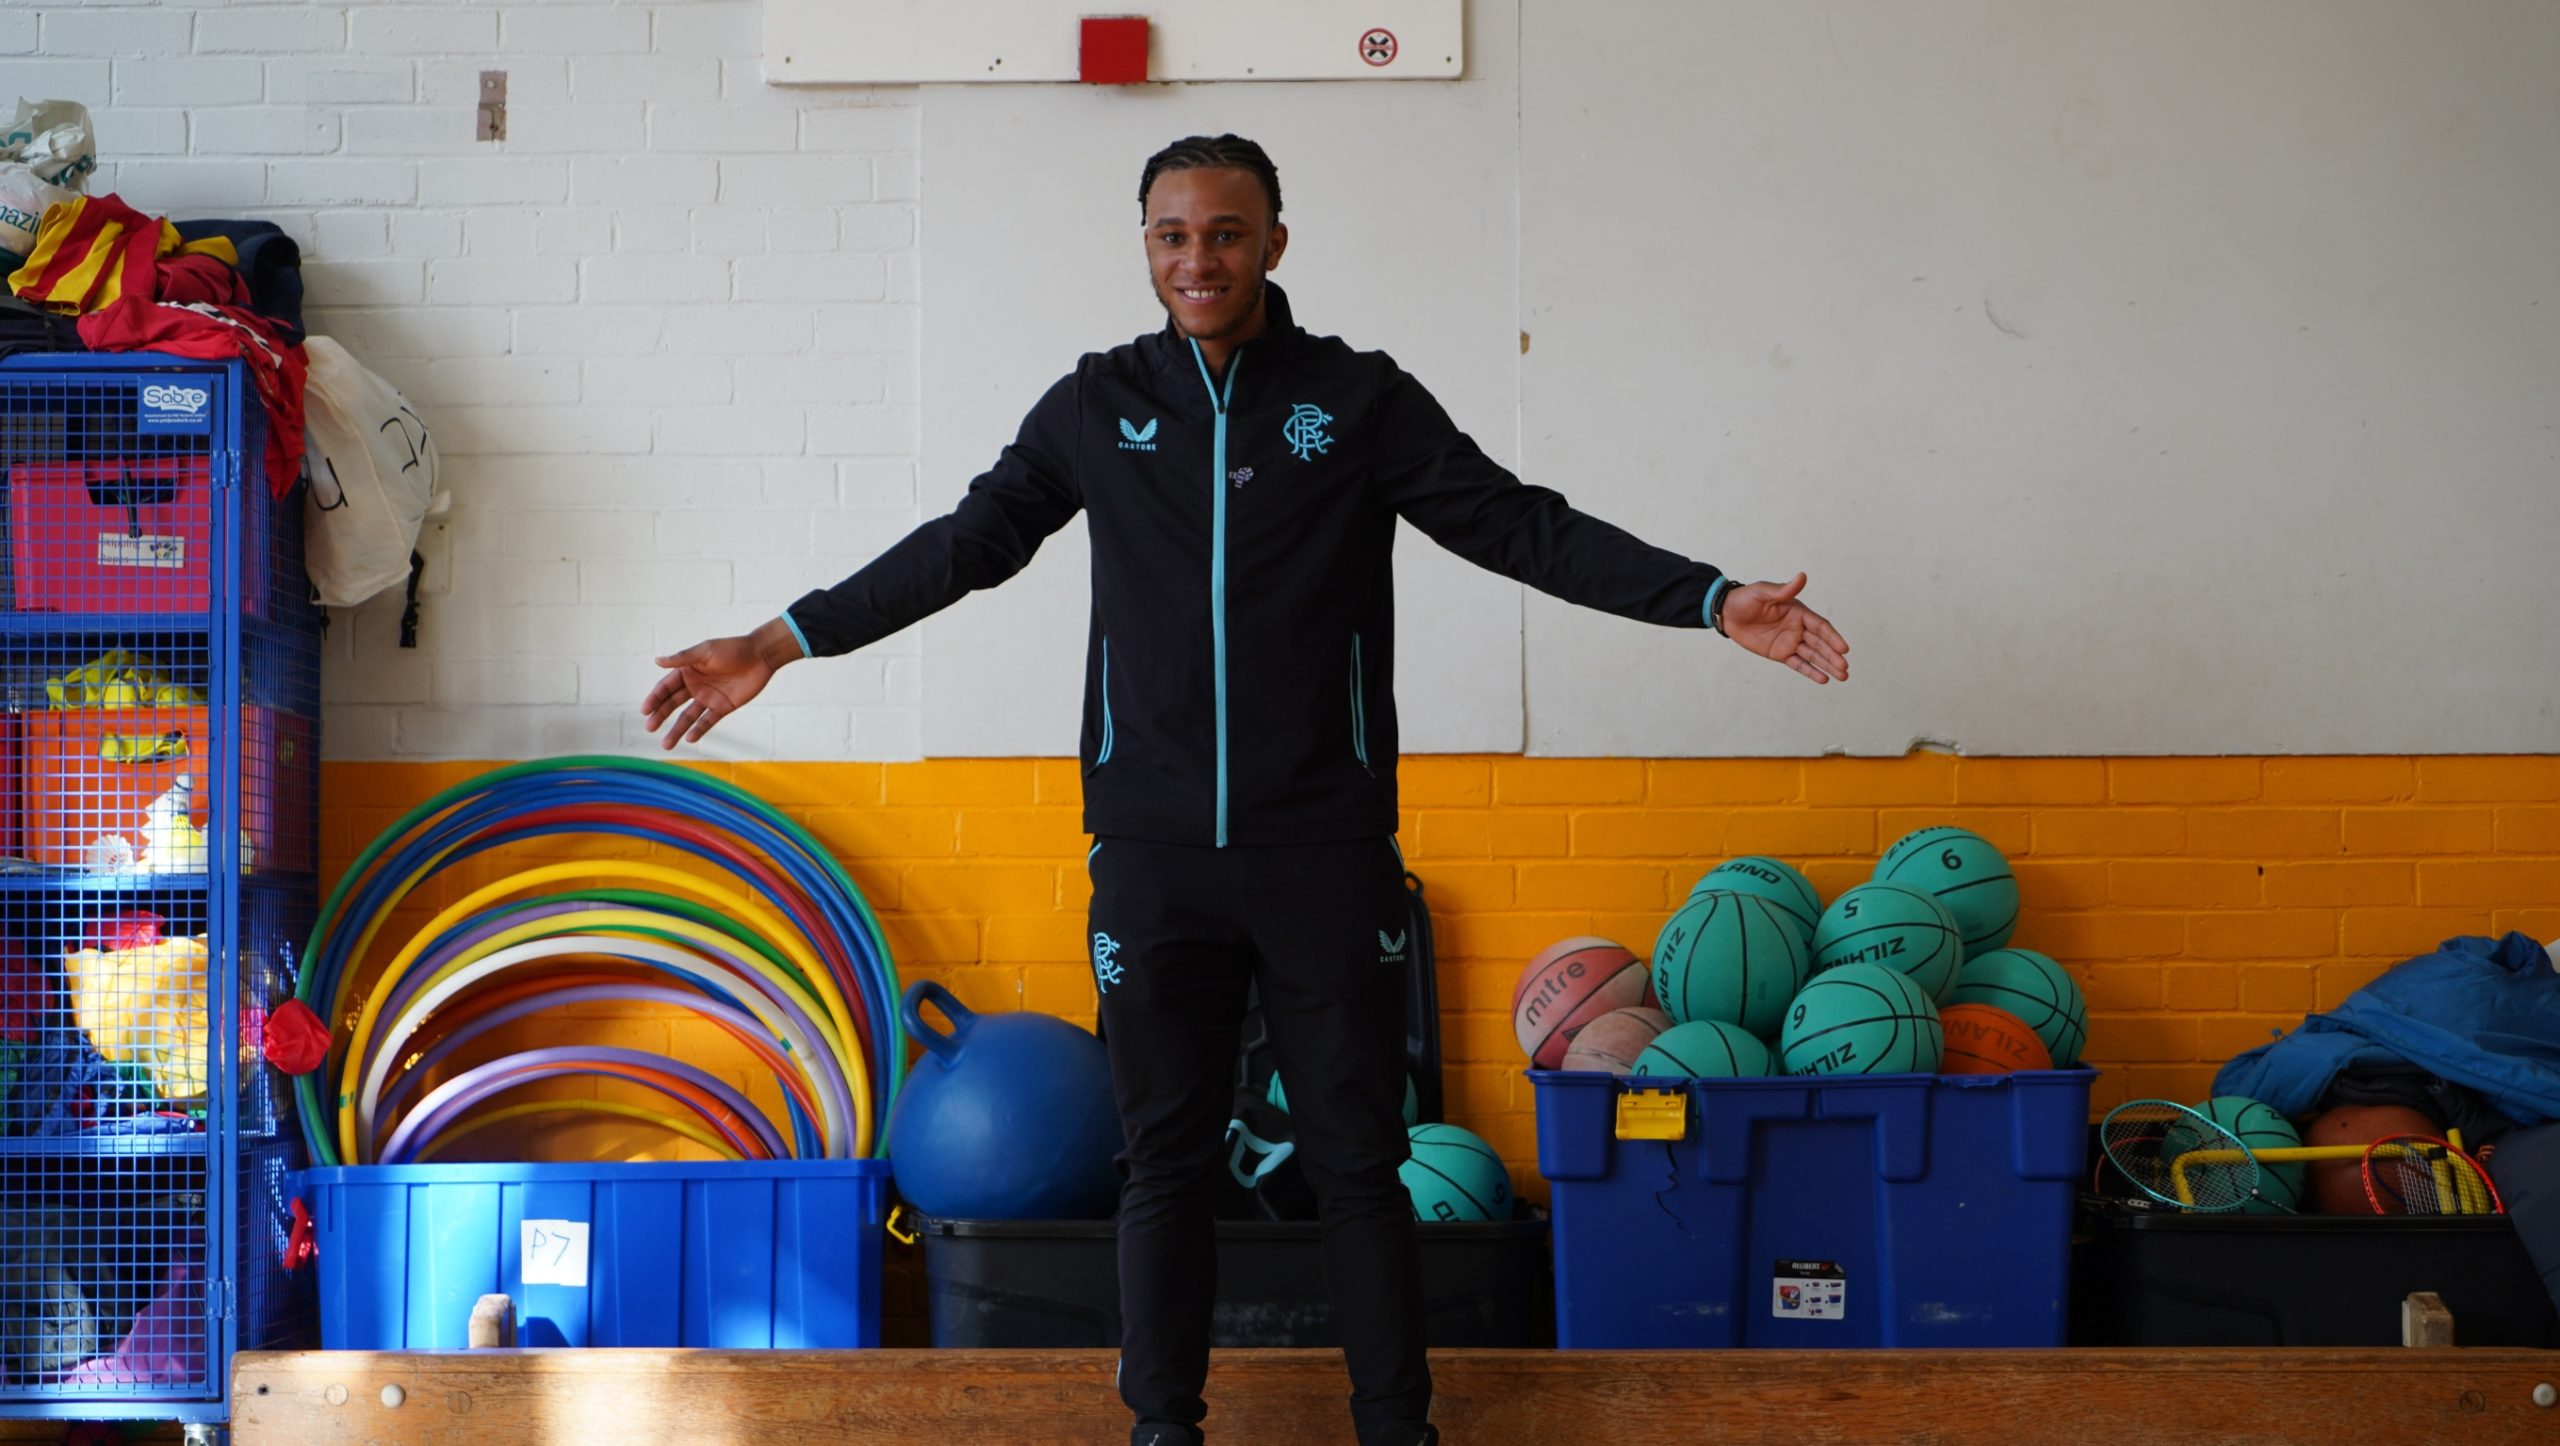 Zak Lovelace standing in a primary school gym hall